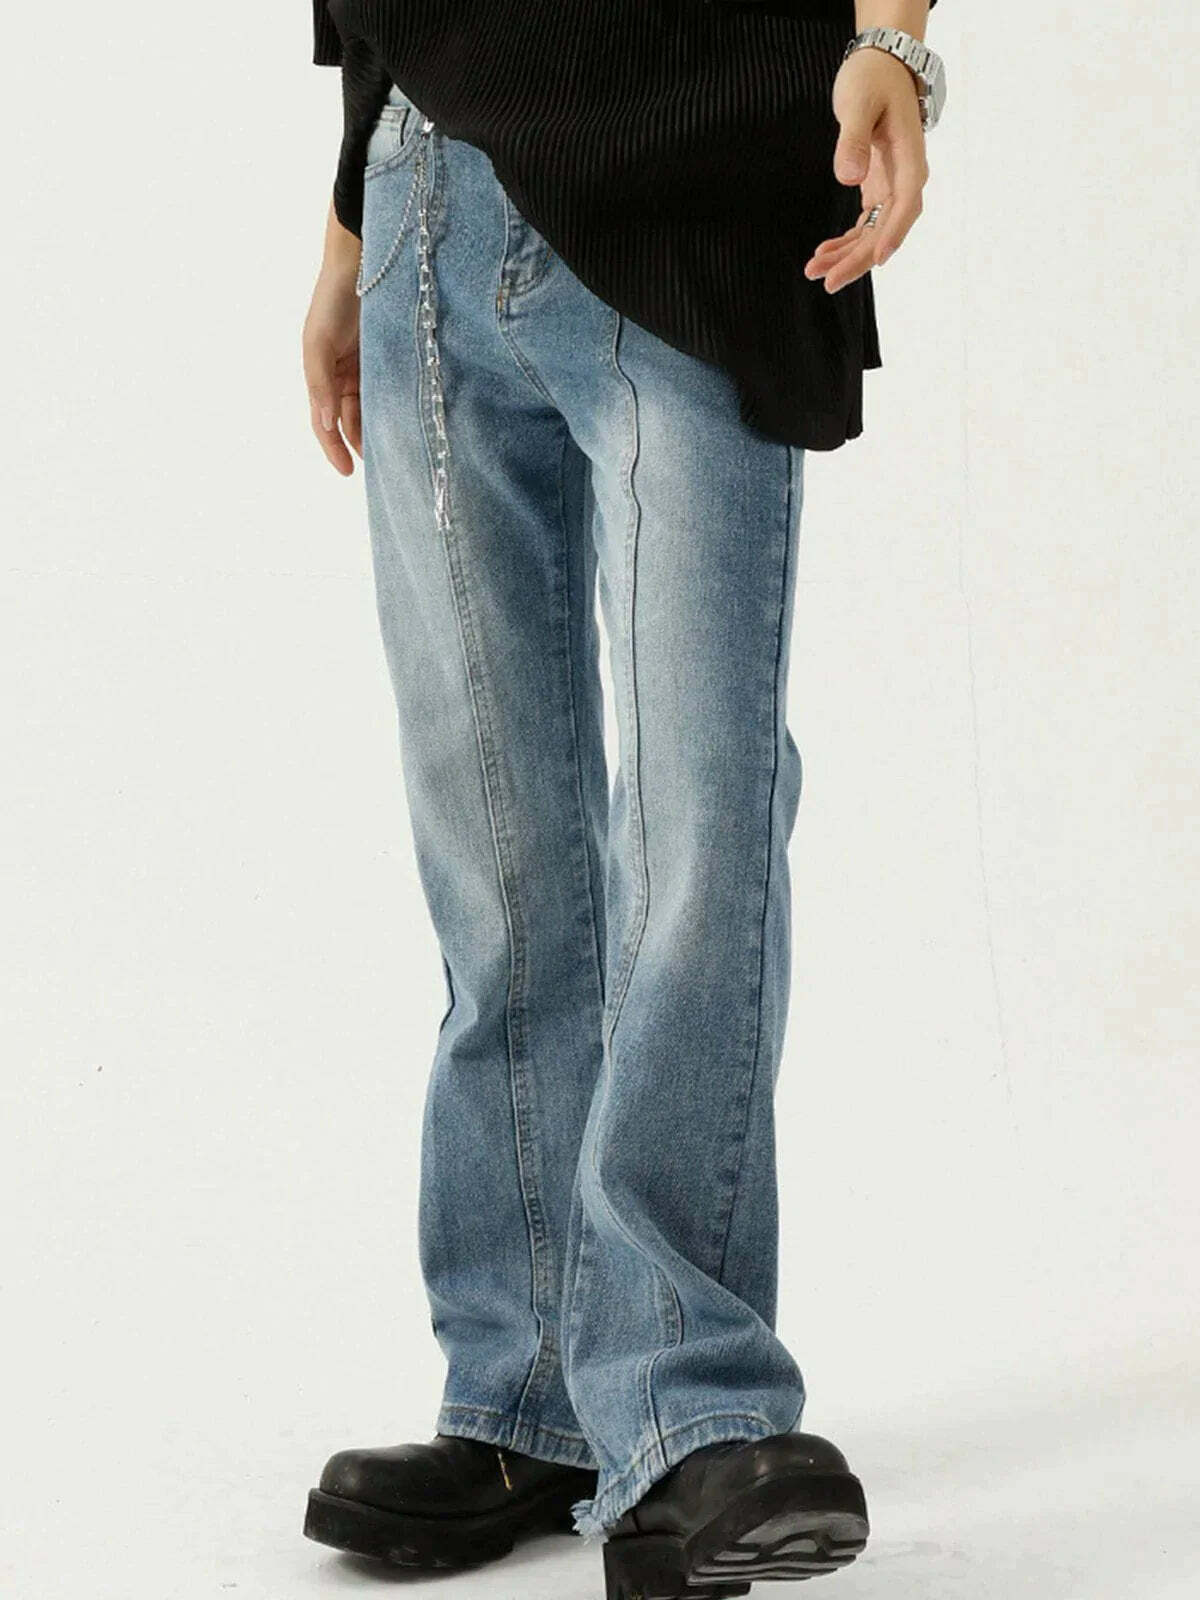 frayed microflare jeans urban chic essential 4574